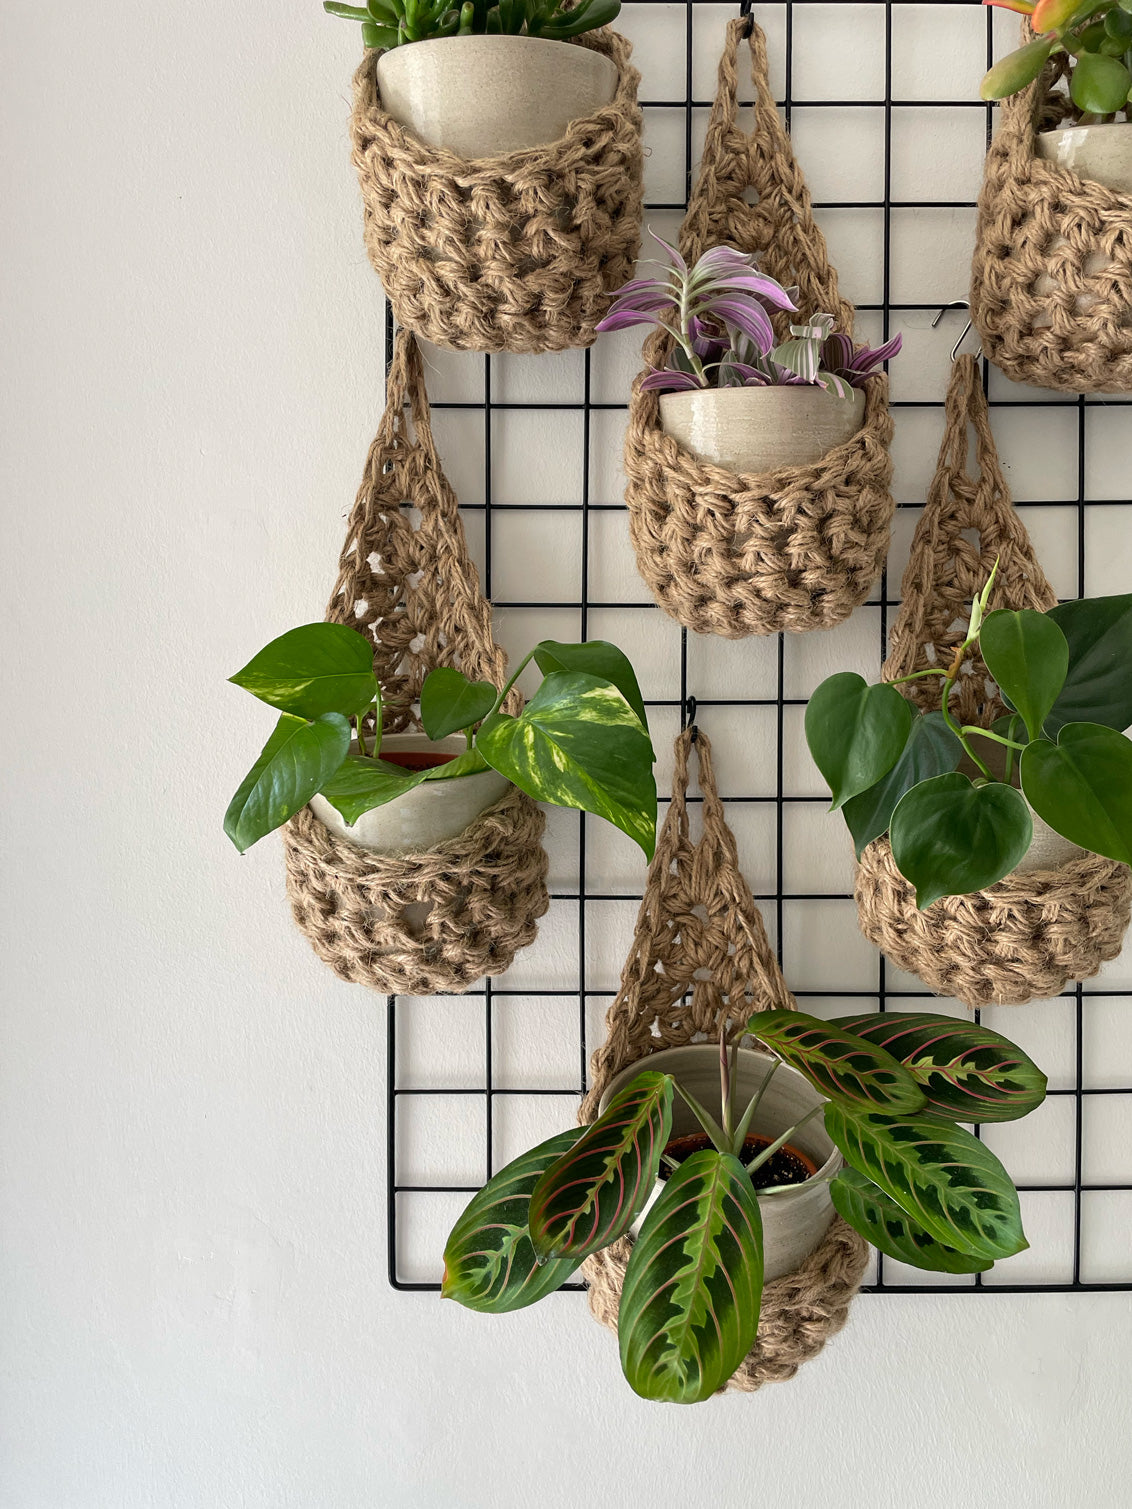 Image showing a close up photo of a grouping of 6 tierdrop shaped natural jute wall hanging planters. Each handmade planter is hung against the wall, holding a ceramic pot and plant. Photo is showing a creative sapce saving method of showing of your houseplants.  